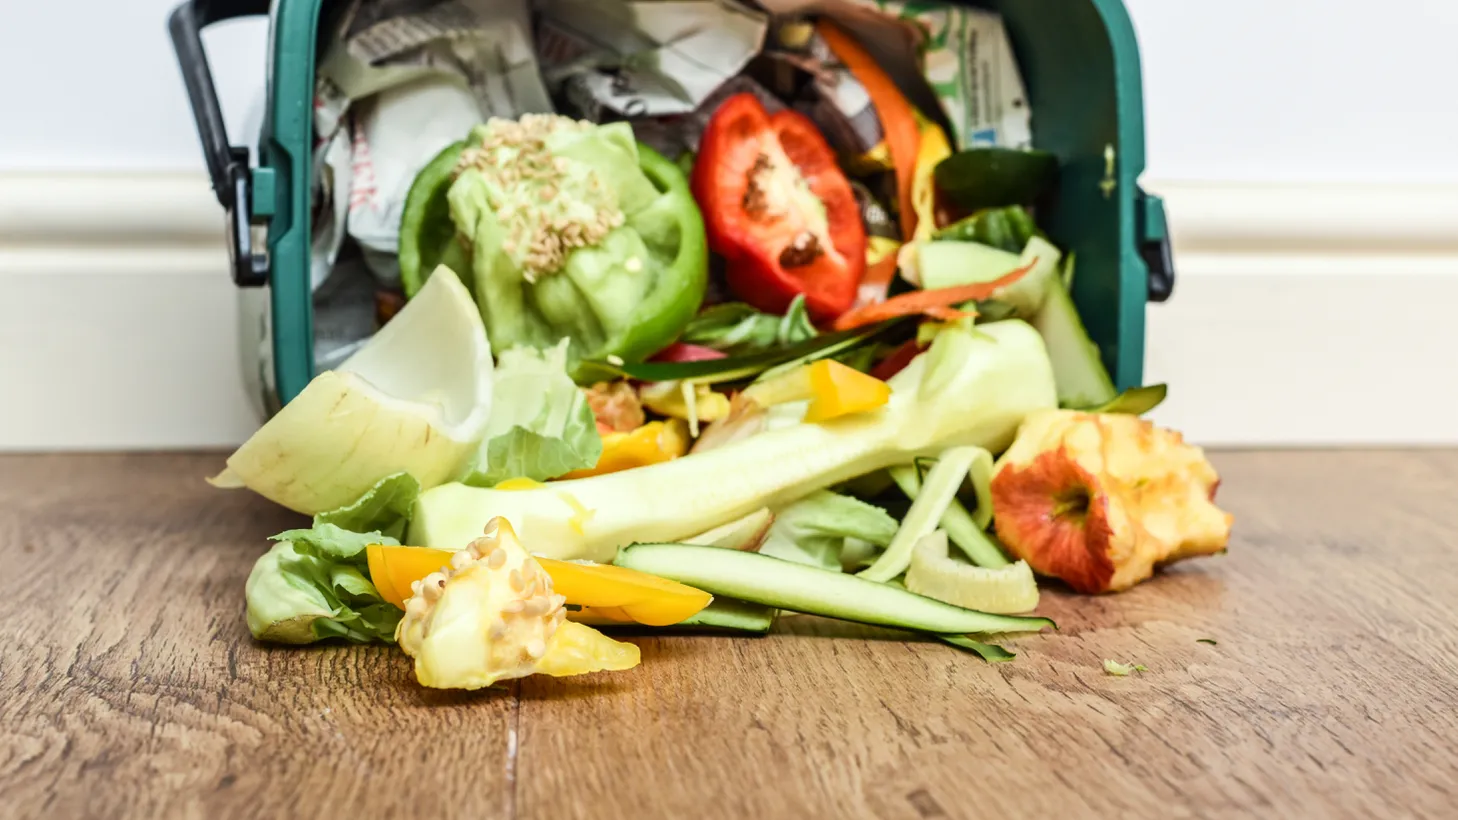 Green bins aren’t just for yard waste anymore. They’re for orange peels and chicken bones, too.